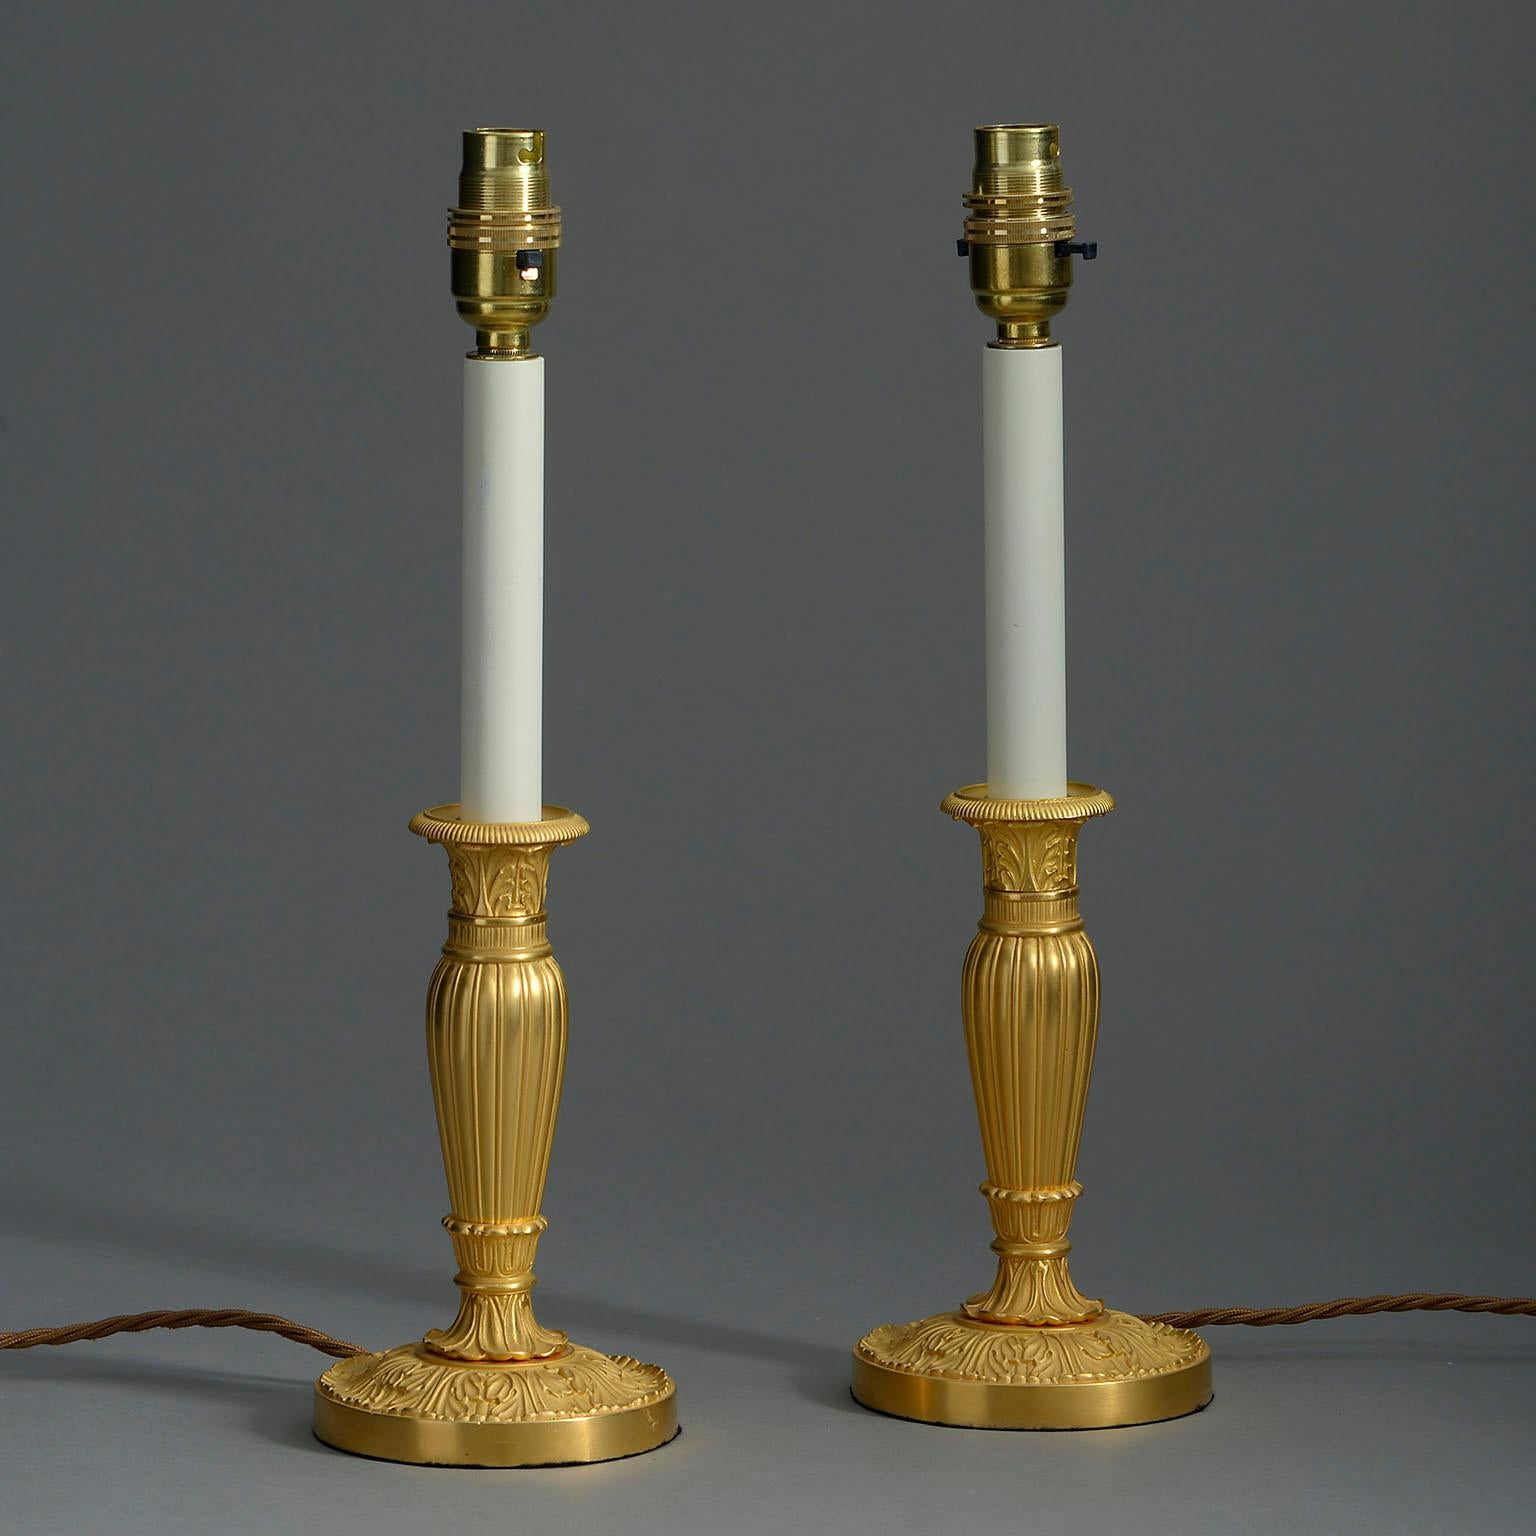 A pair of twentieth century ormolu candlesticks with foliate casting and mounted as lamps.

Height includes painted candle stems.

Wired to UK standards. This pair of lamps can be rewired to all international specifications.

Shades available